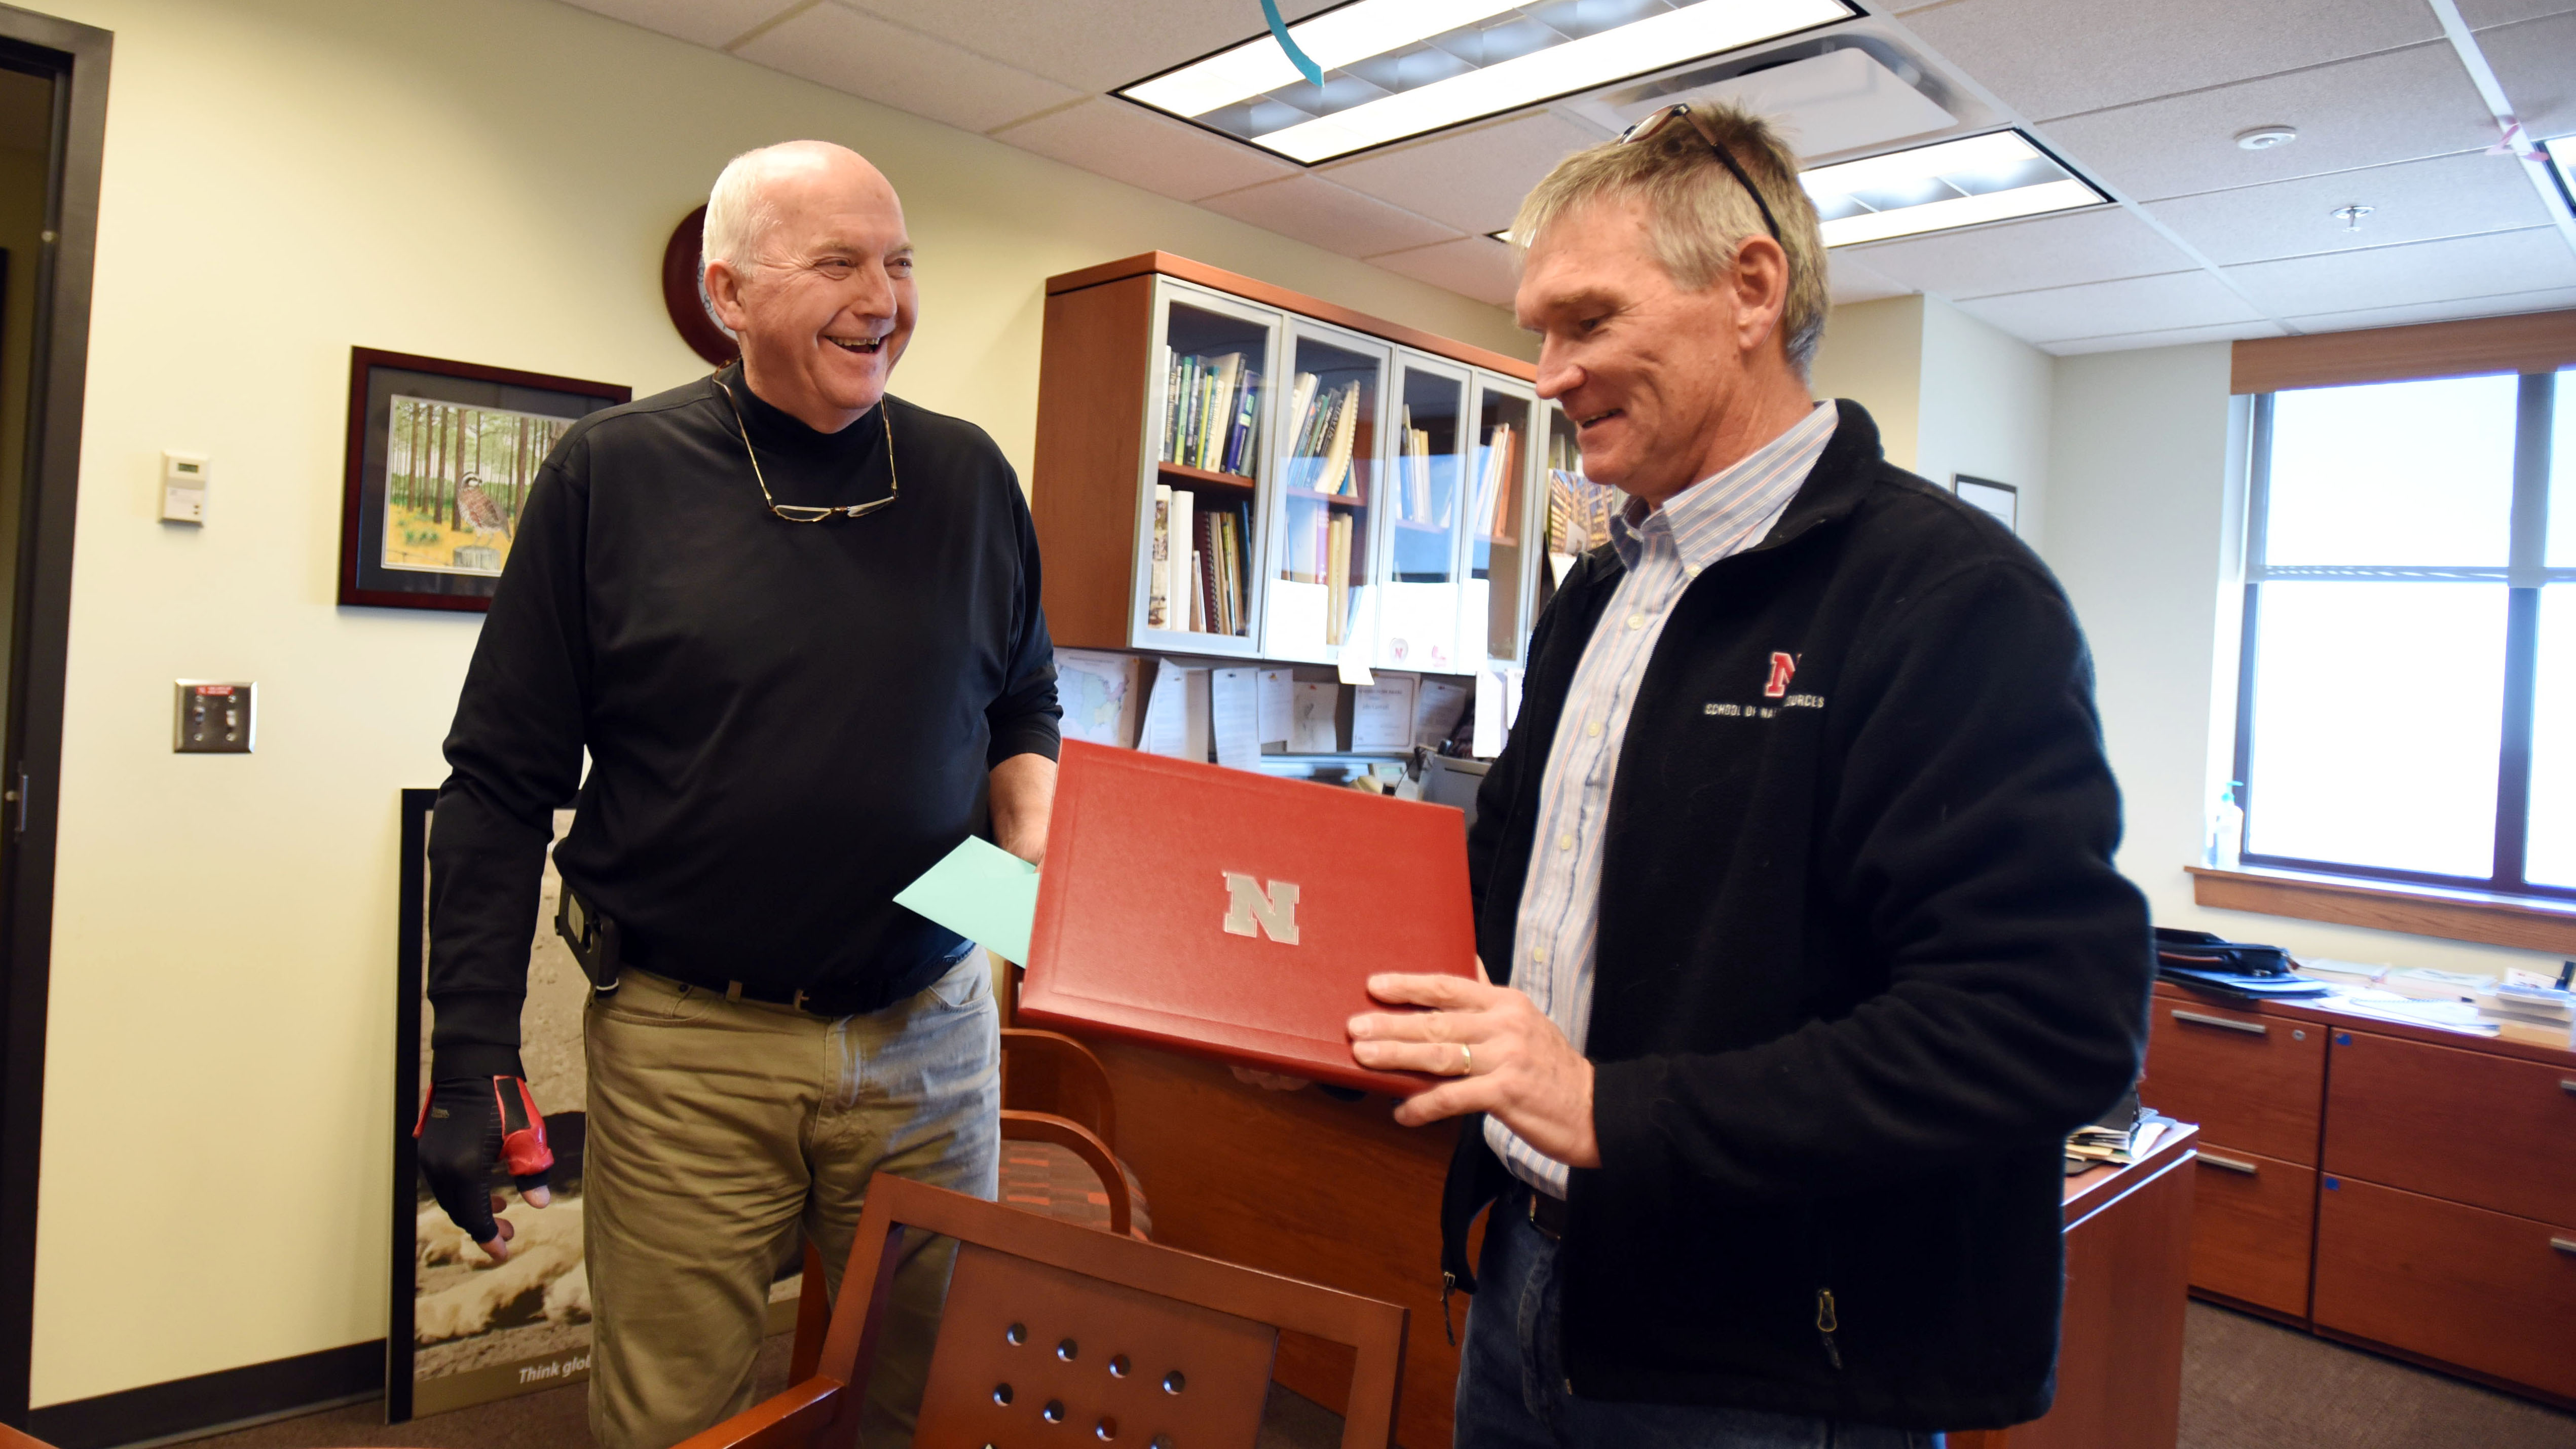 Rick Perk, left, geoscientist with the Center for Advanced Land Management Technologies at the School of Natural Resources, retired Dec. 20, 2019, with a small reception in Hall Hall. Director John Carroll hands him a memento marking the occasion. 